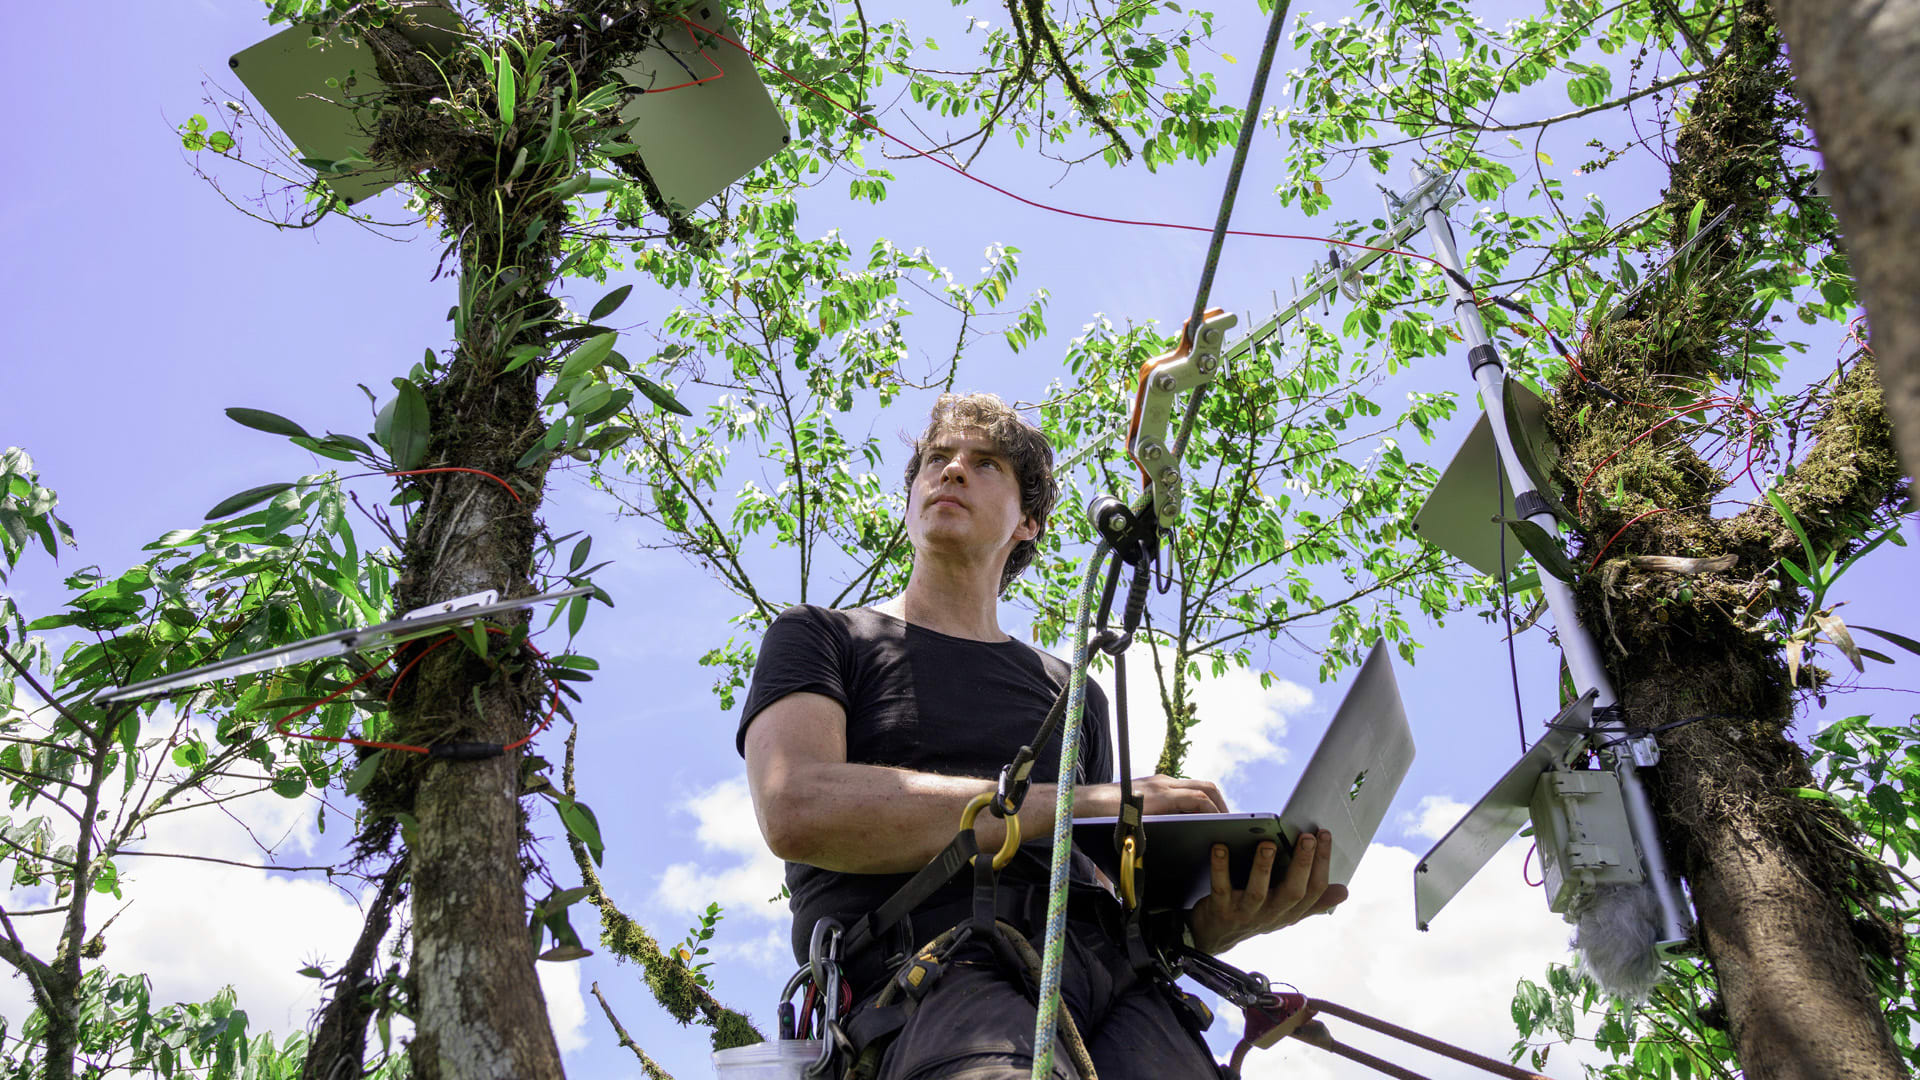 This network of microphones listens for the chainsaws of illegal loggers in the rain forest